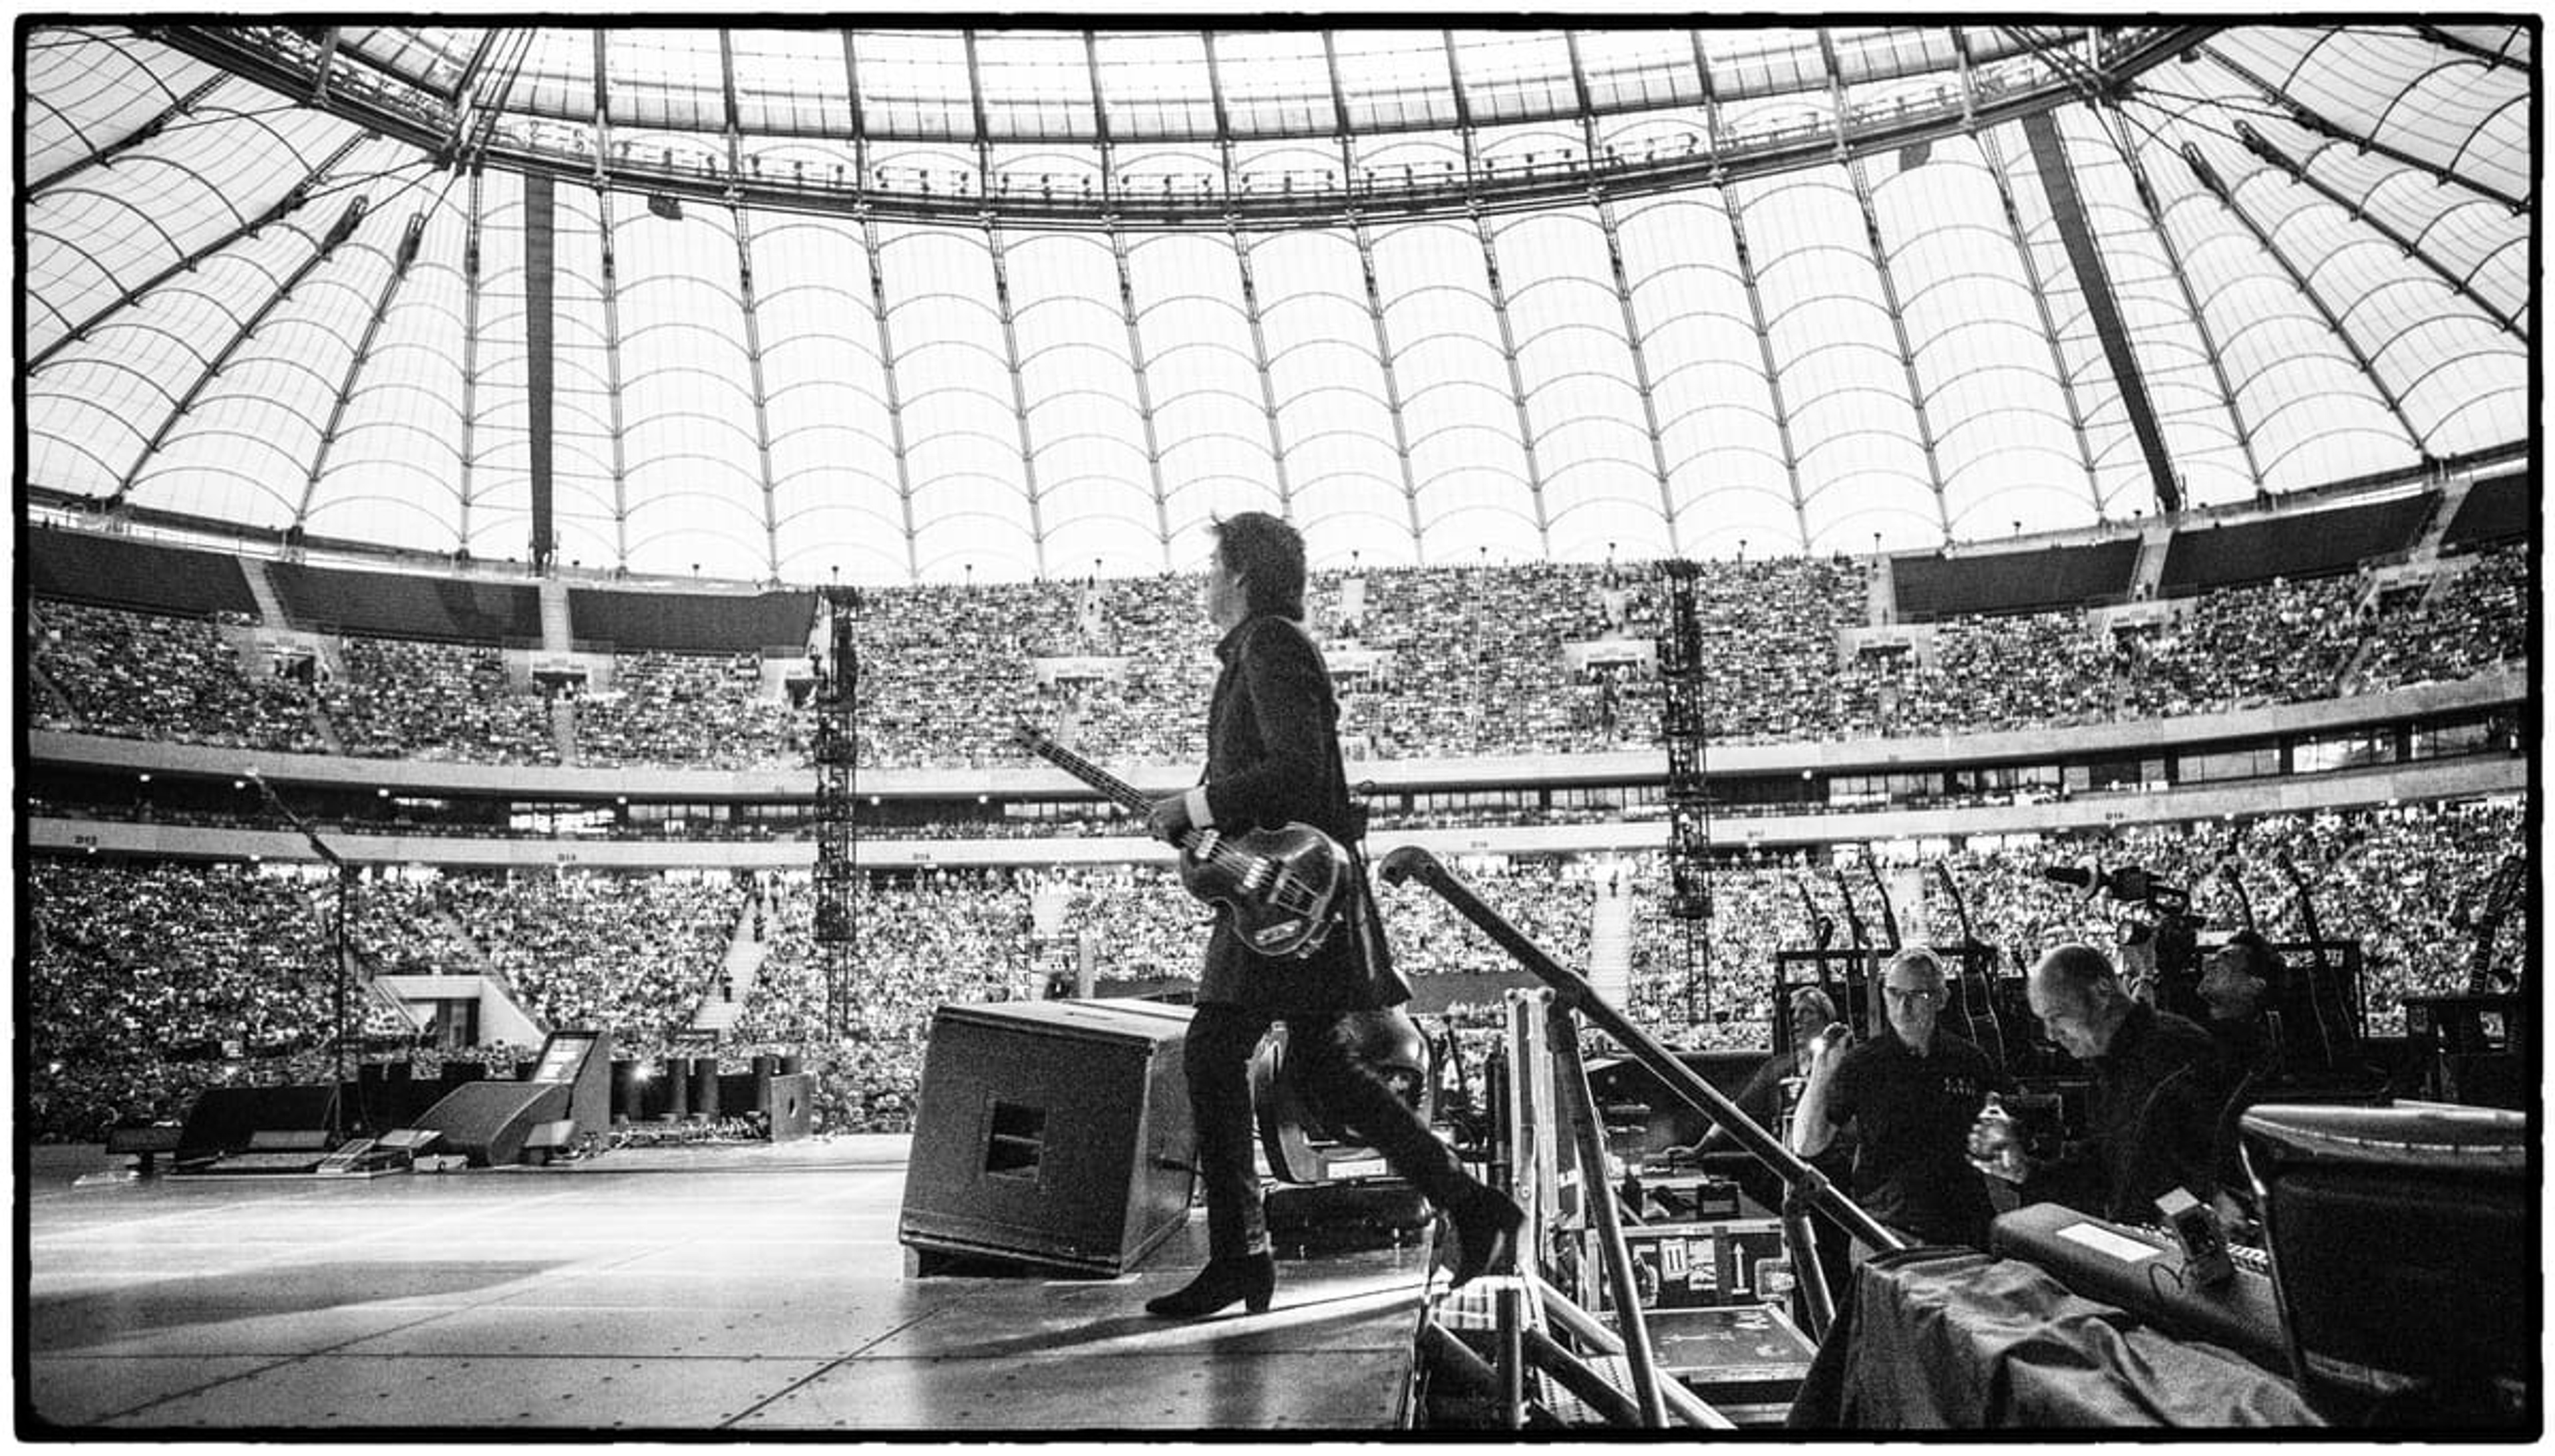 Paul coming on stage, National Stadium, Warsaw, 22nd June 2013